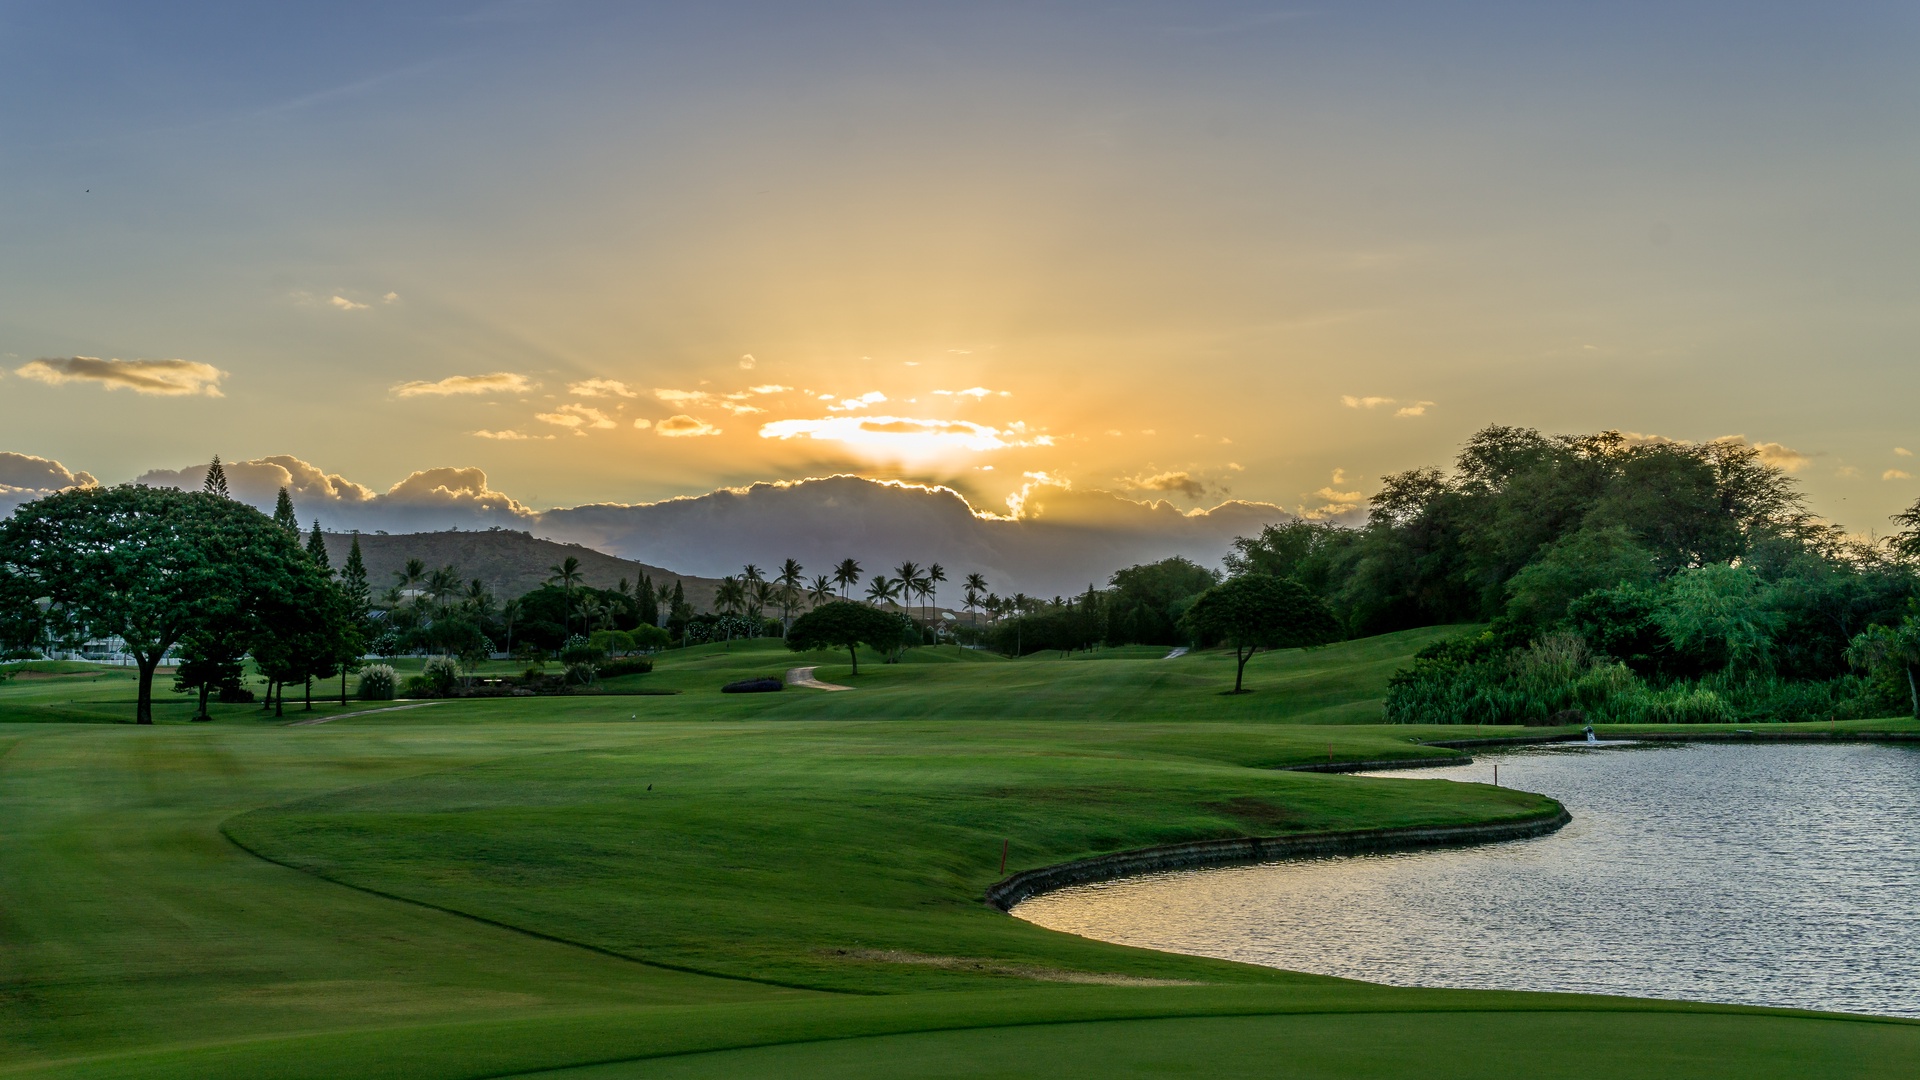 Kapolei Vacation Rentals, Coconut Plantation 1086-4 - An Oahu Sunrise looking out over the golf course.